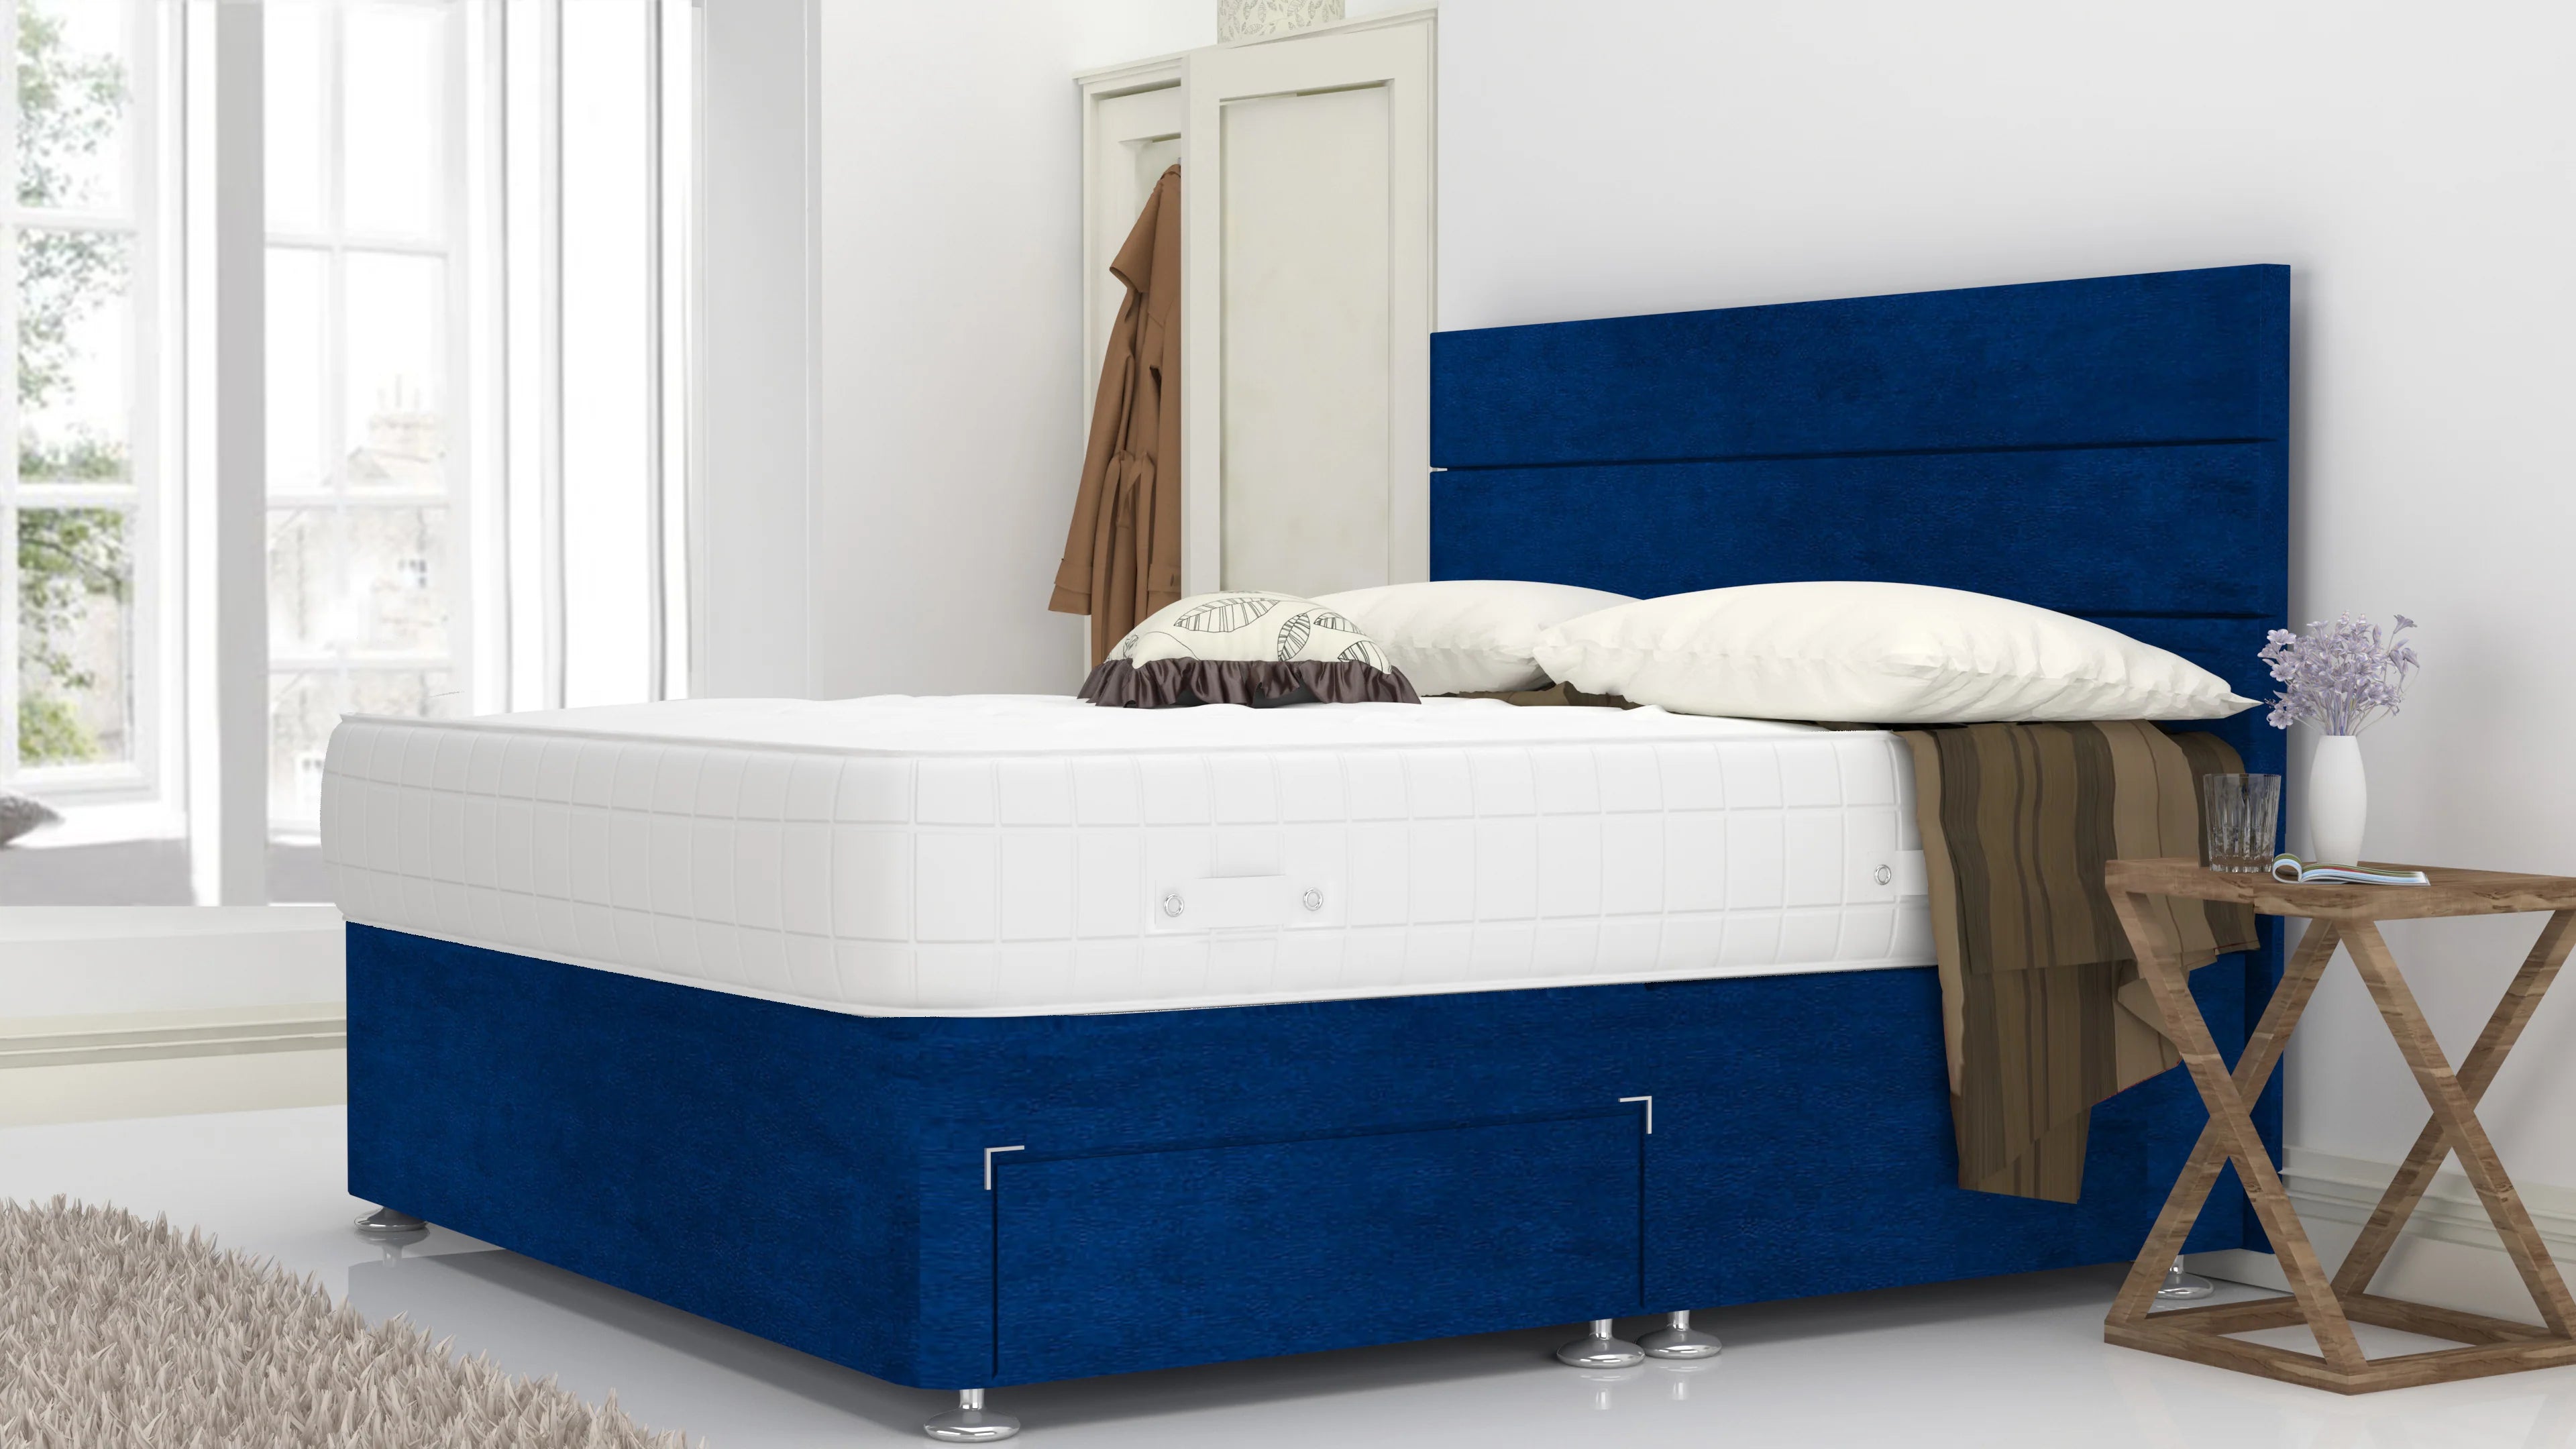 Blue Plush 3 Feet Divan Bed Set With 3 Panel Headboard (Included Feet) And Free Pillow Top Mattress